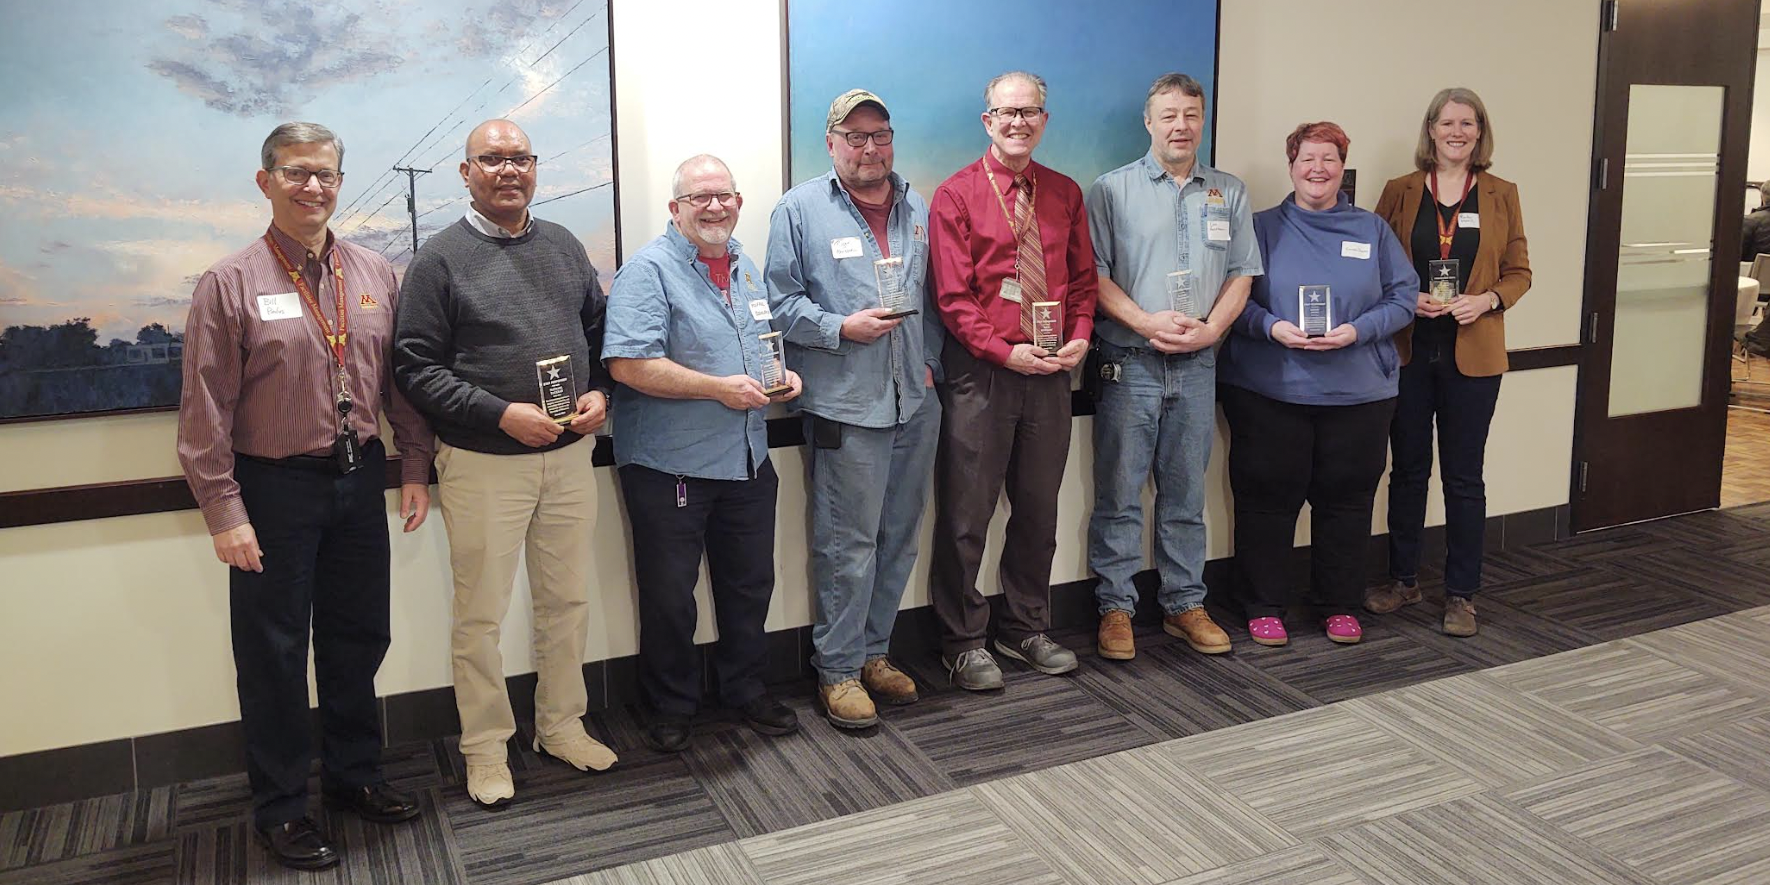 Pictured above with FM AVP Bill Paulus are the FM Star Performers who attended the award ceremony in January. From left to right: Bill Paulus, Natnael Tecleab, Michael Bigelbach, Roger Christen, Bill Rinehart, Daniel Hansmann, Sarah Jones, and Emily Marin. Below is a full list of the FM recipients.